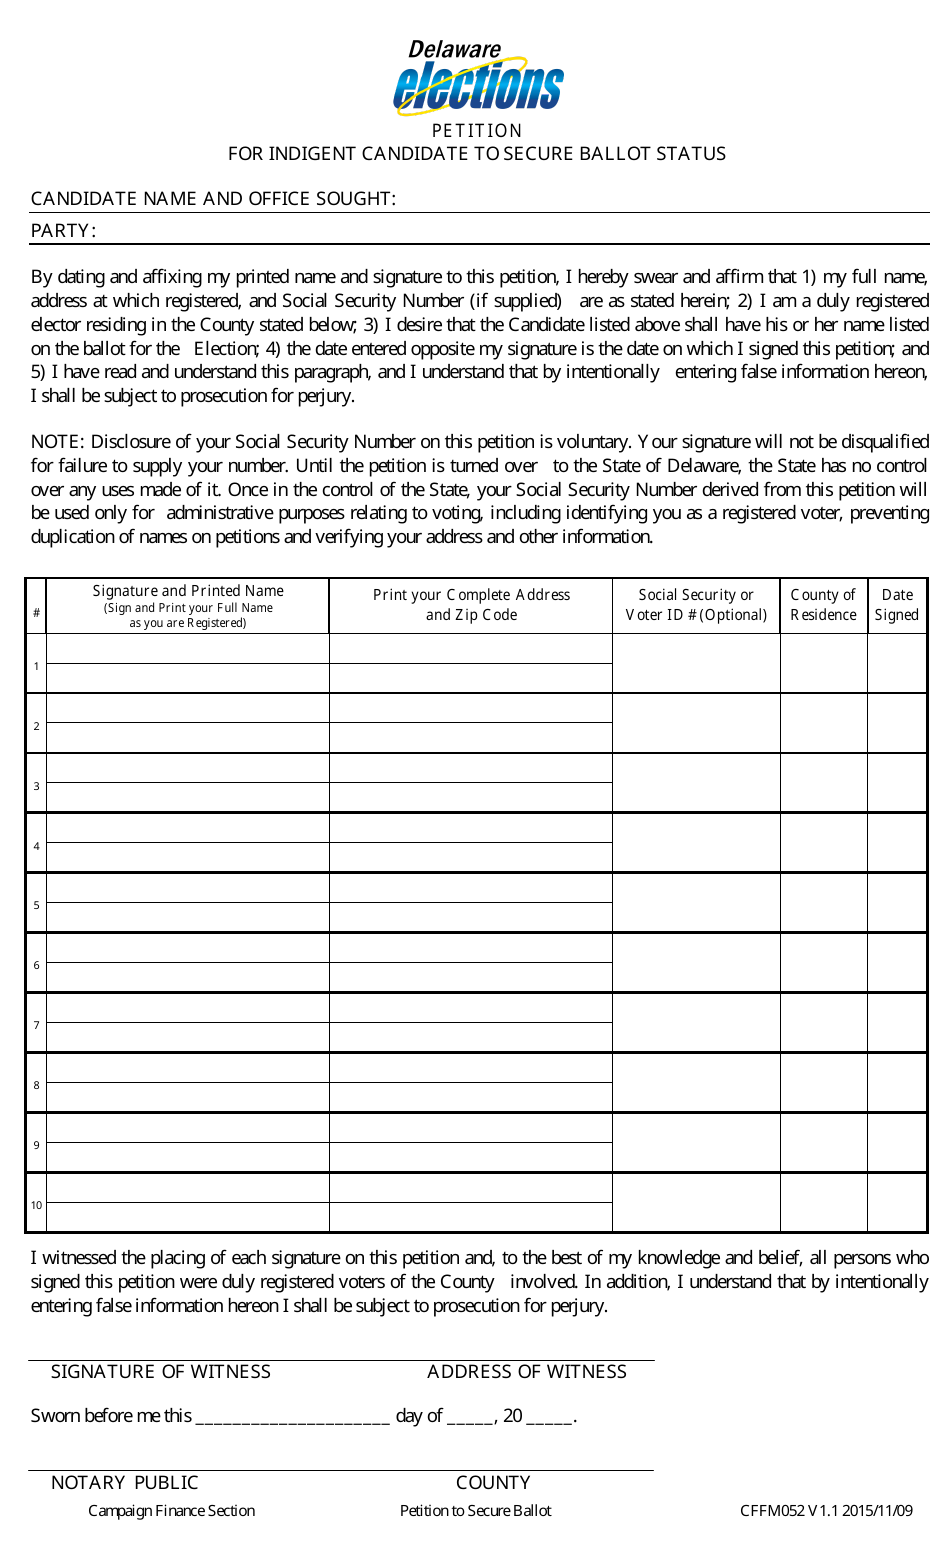 Form CFFM052 Petition for Indigent Candidate to Secure Ballot Status - Delaware, Page 1